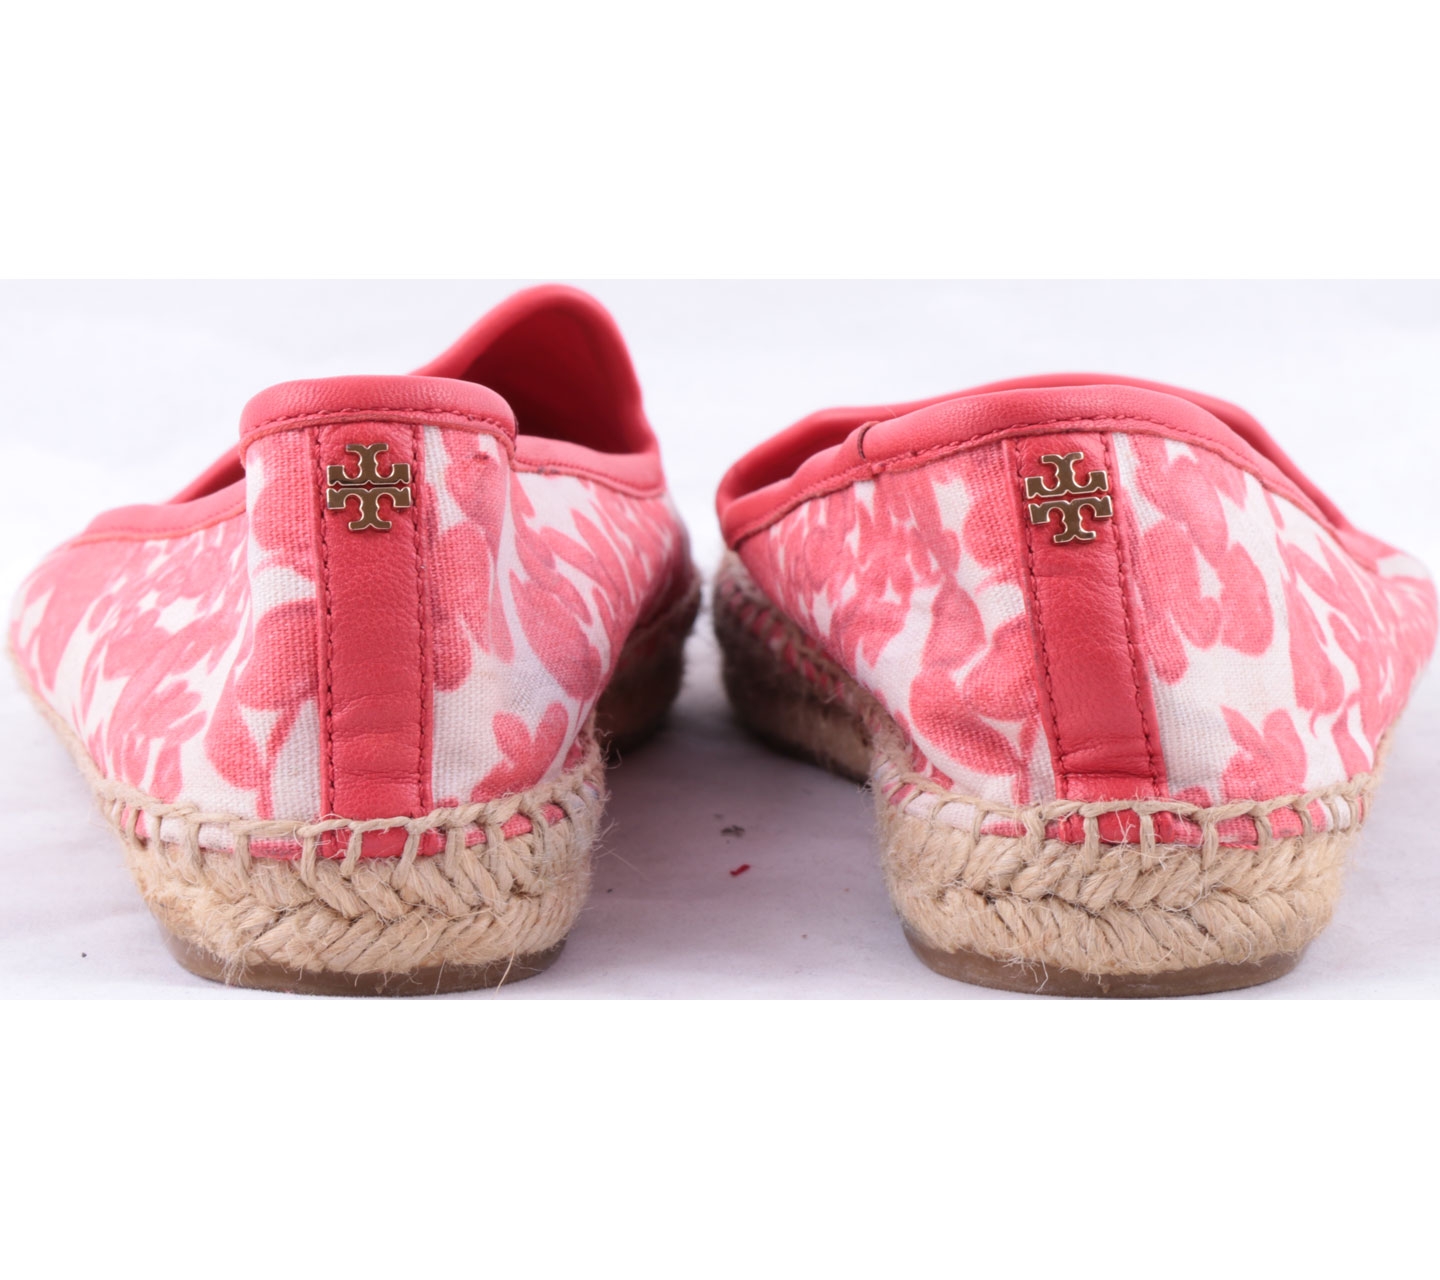 Tory Burch Red And Cream Floral Flats